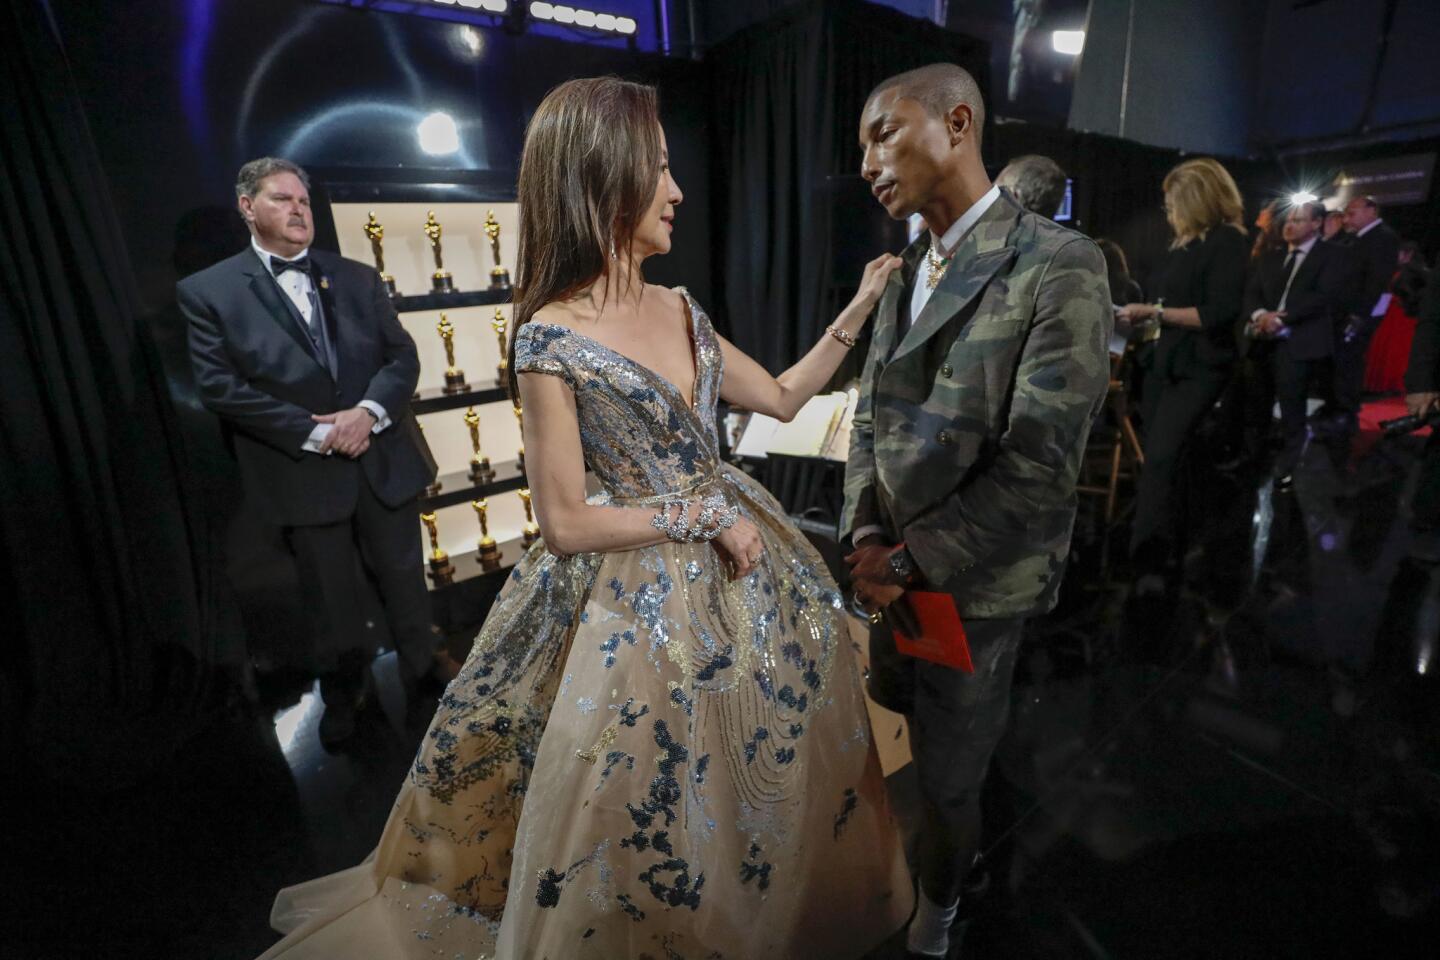 Presenters Michelle Yeoh and Pharrell Williams backstage.